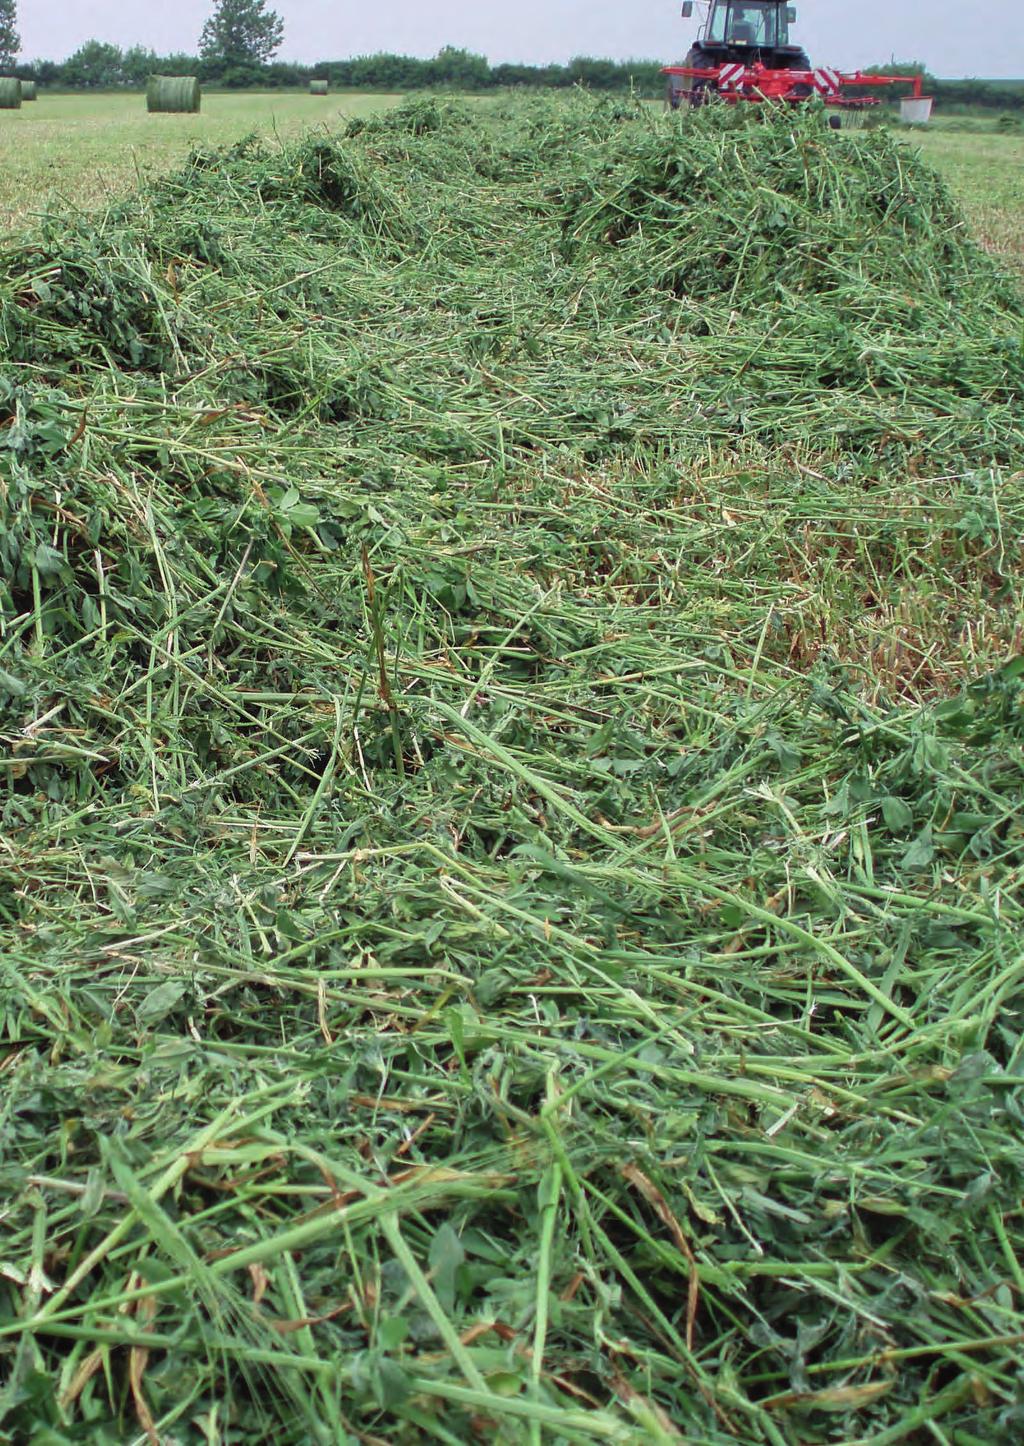 Grazing Forage Options 20 Grazing Forage Options 21 An under-used forage asset Interest amongst UK livestock farmers in lucerne as a forage crop has increased significantly in recent years.